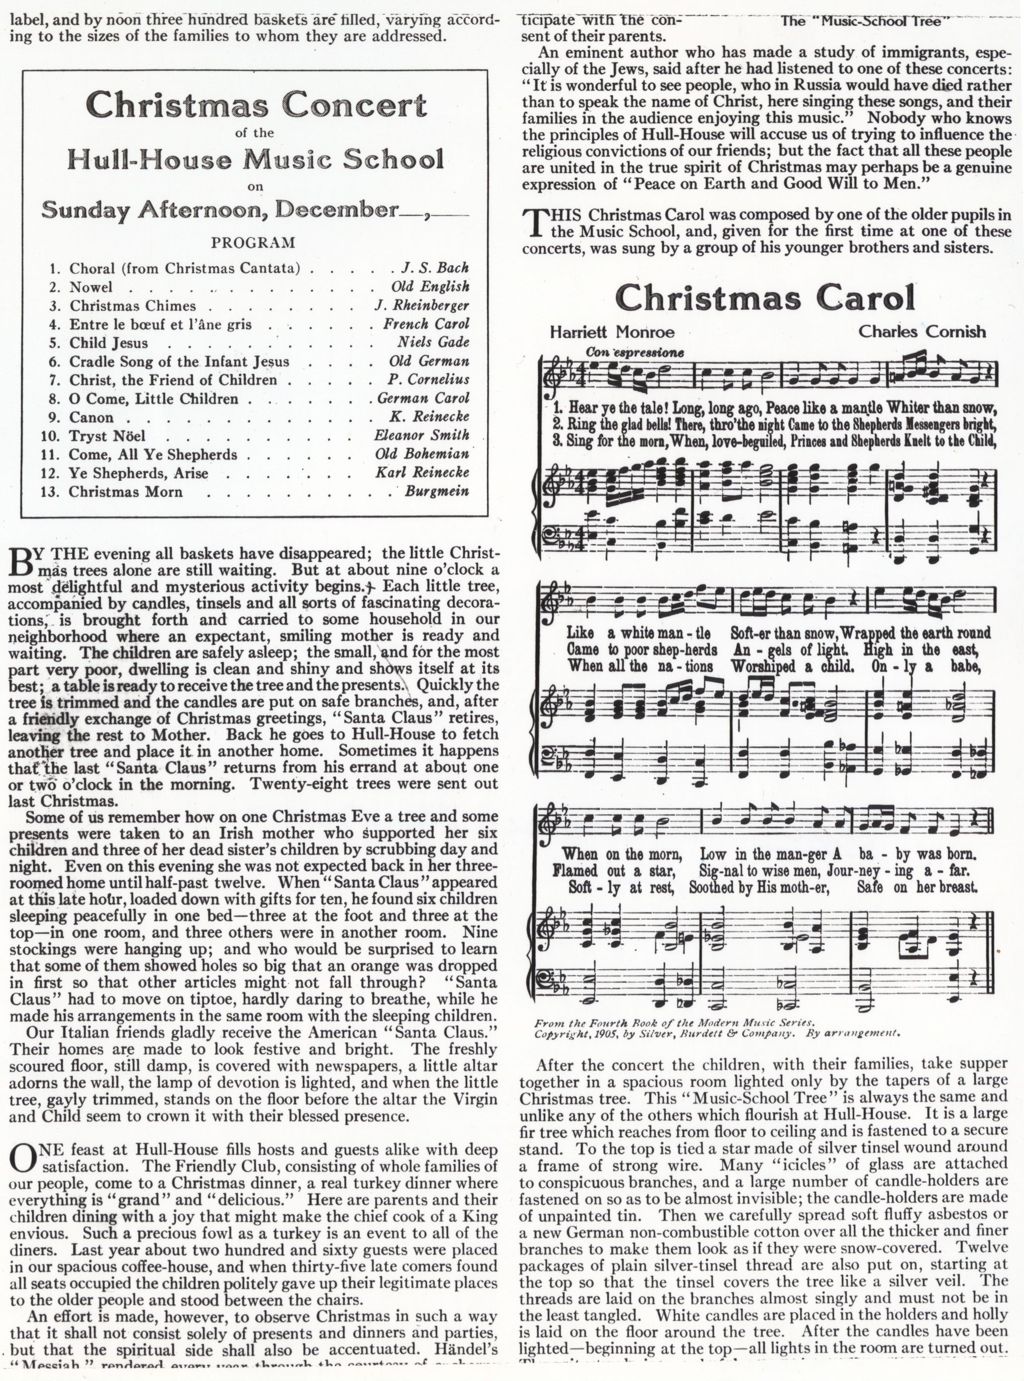 Page from "Christmas at Hull-House" article with score for Christmas carol